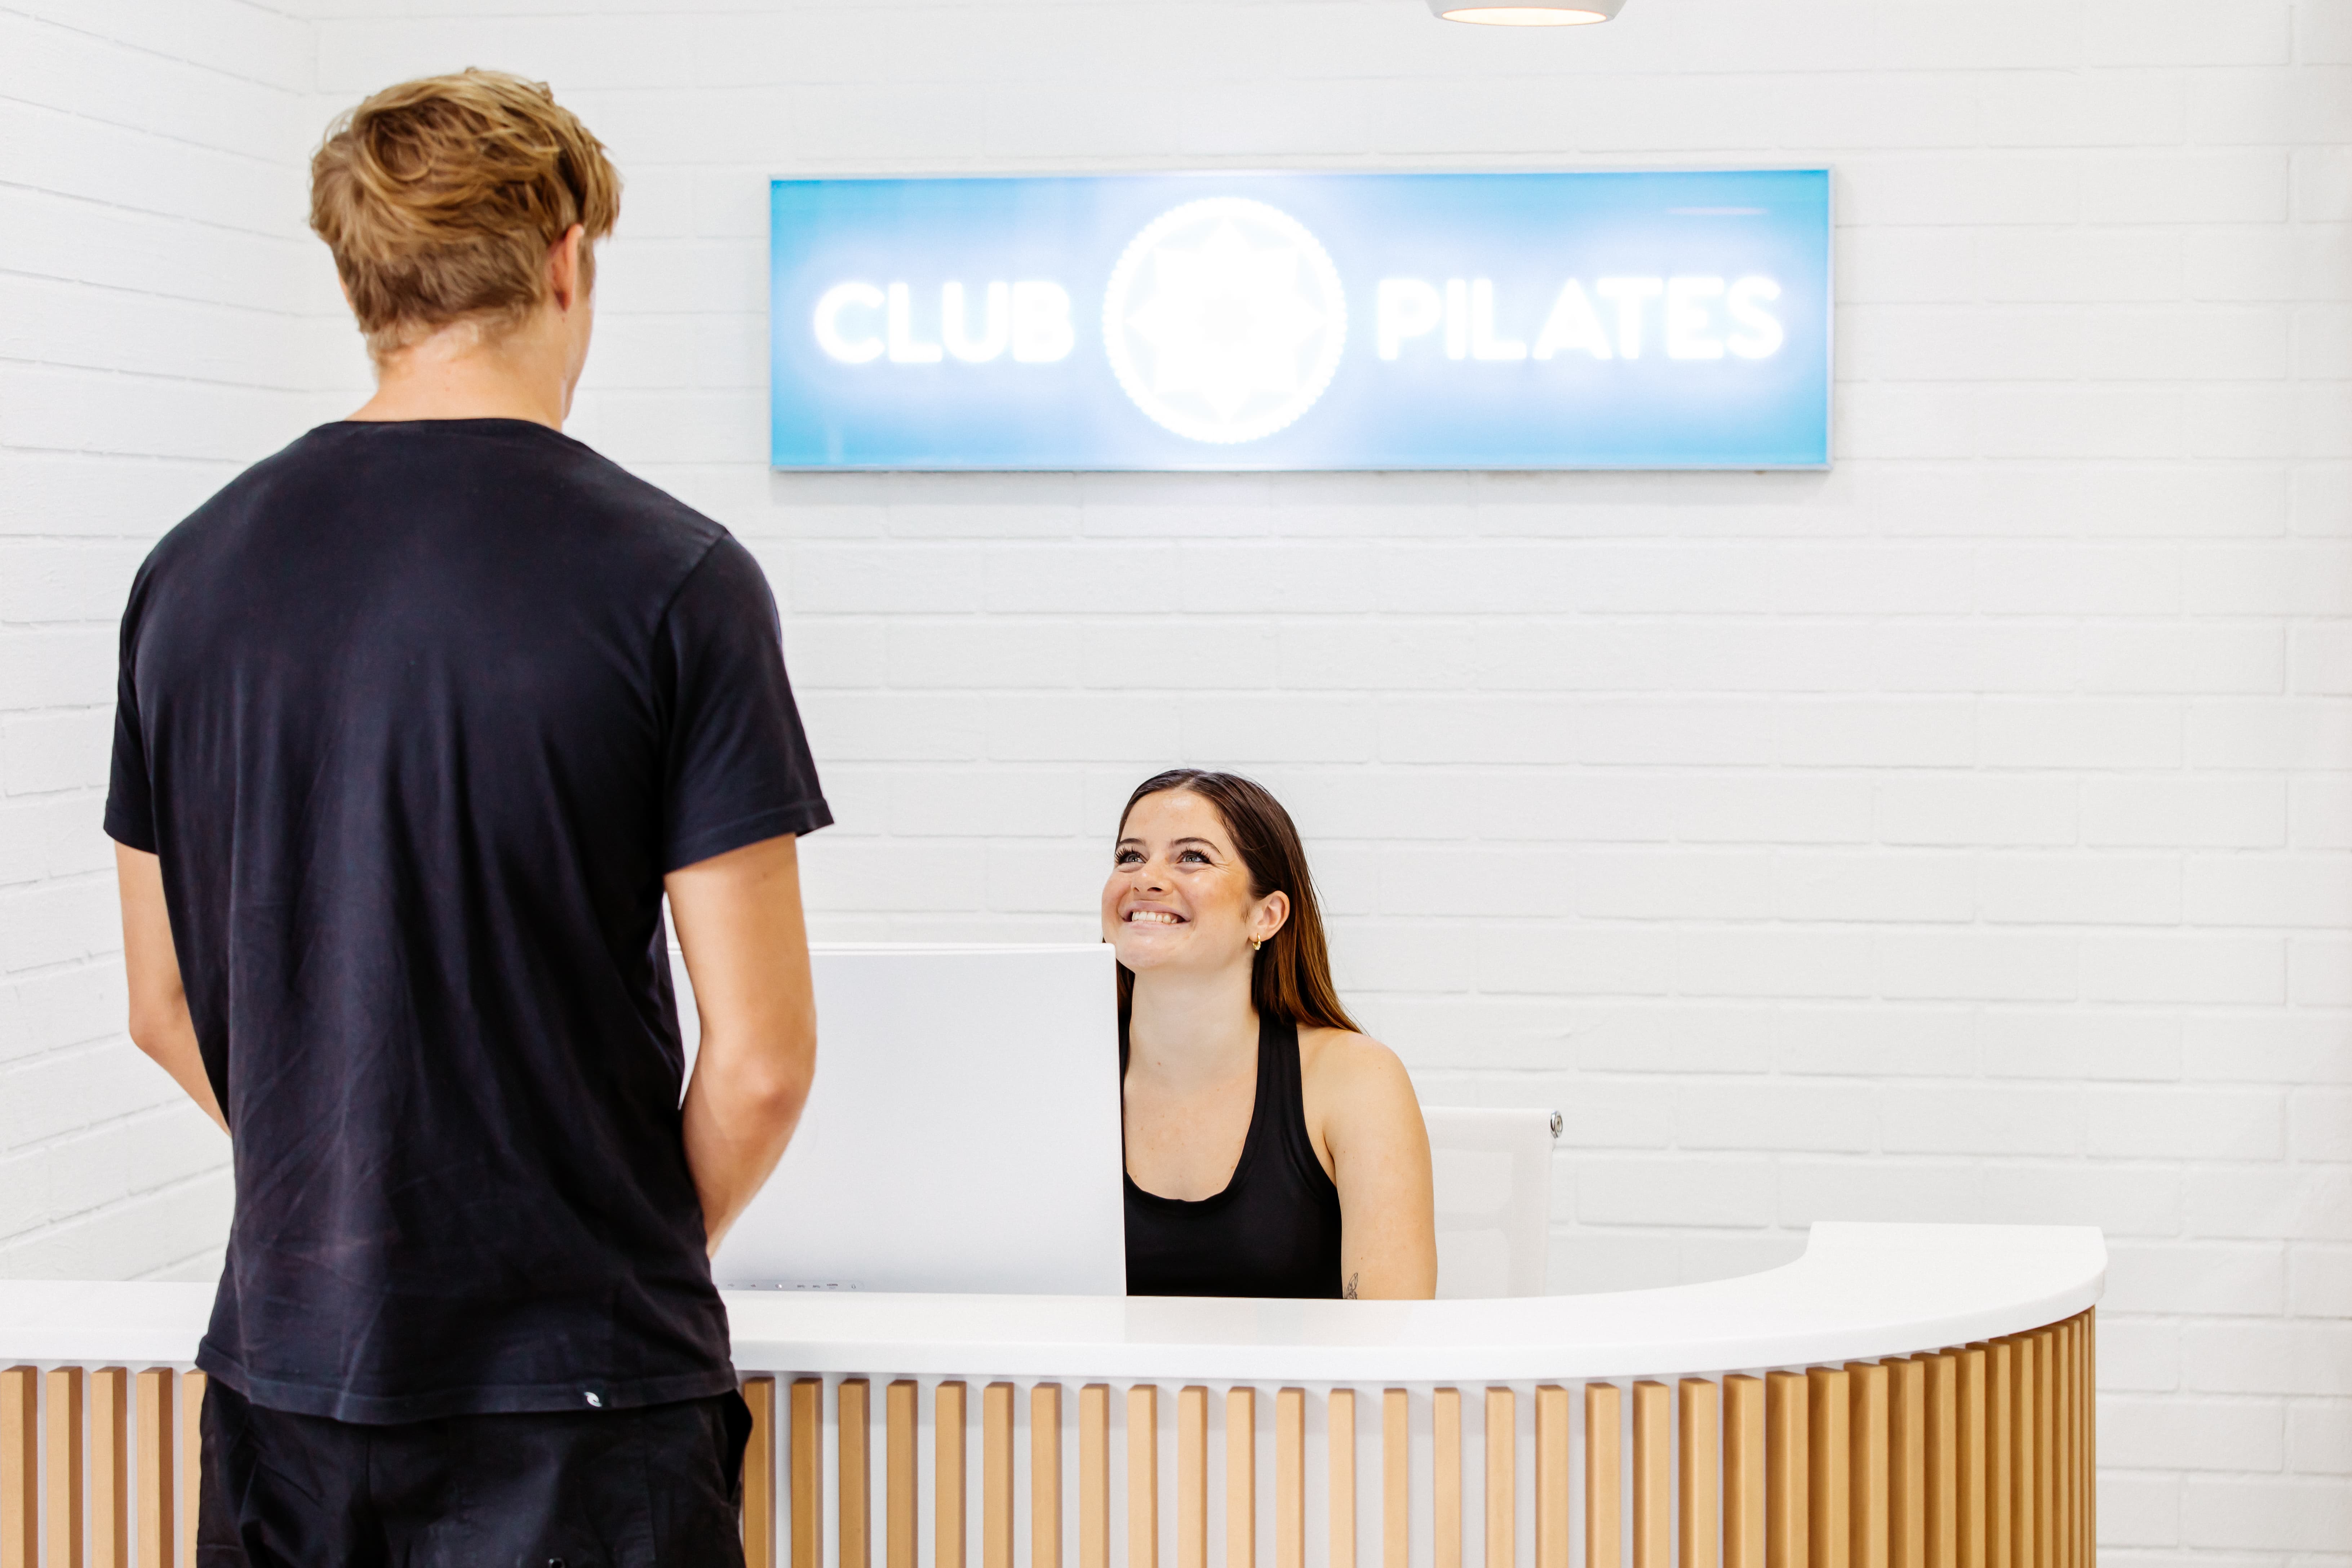 Sign up to be a Club Pilates Instructor